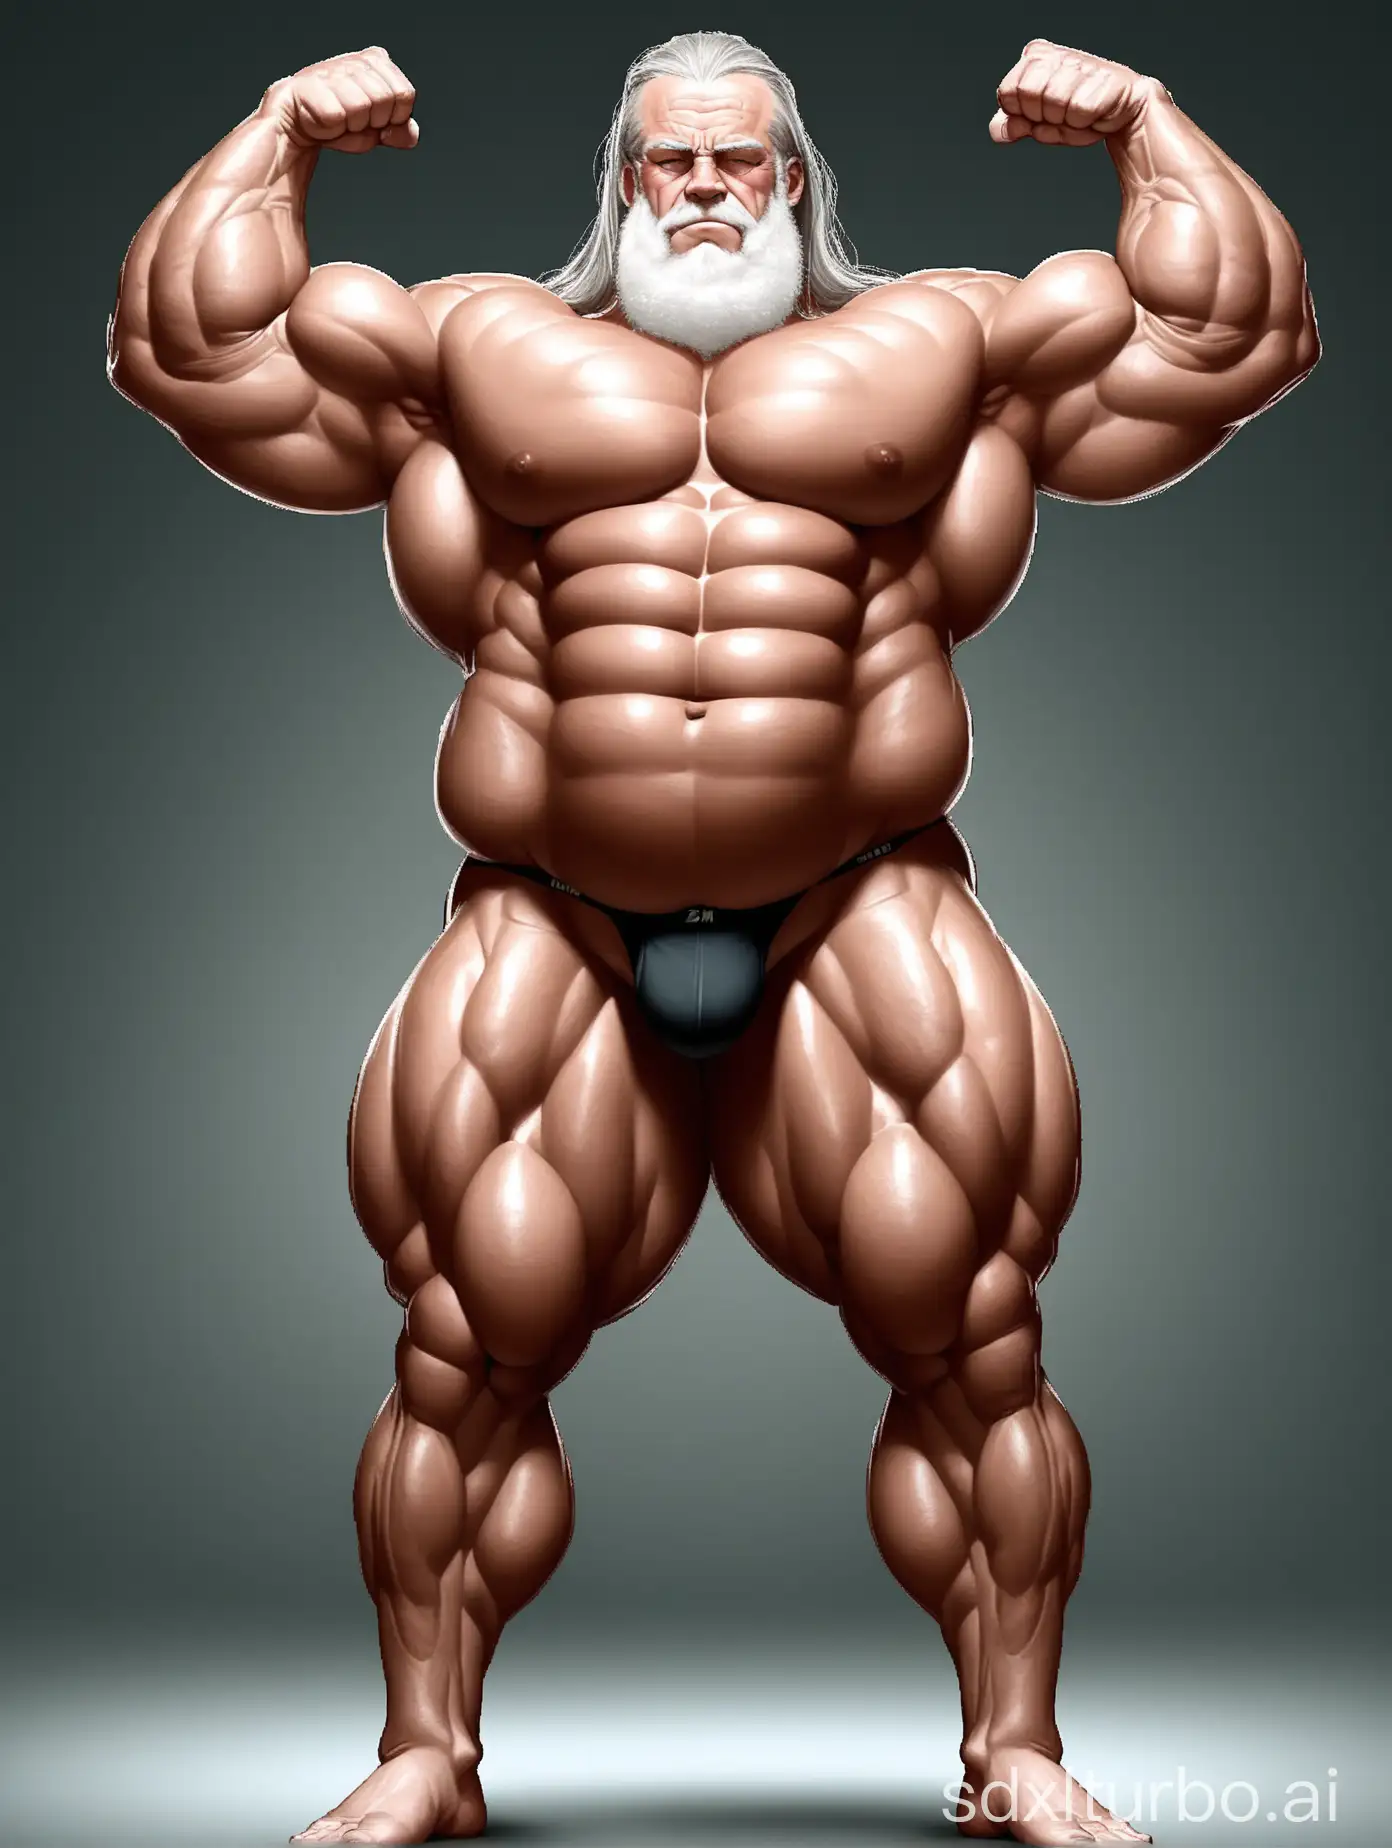 Majestic-Elderly-Giant-Showcasing-Muscular-Strength-and-Physique